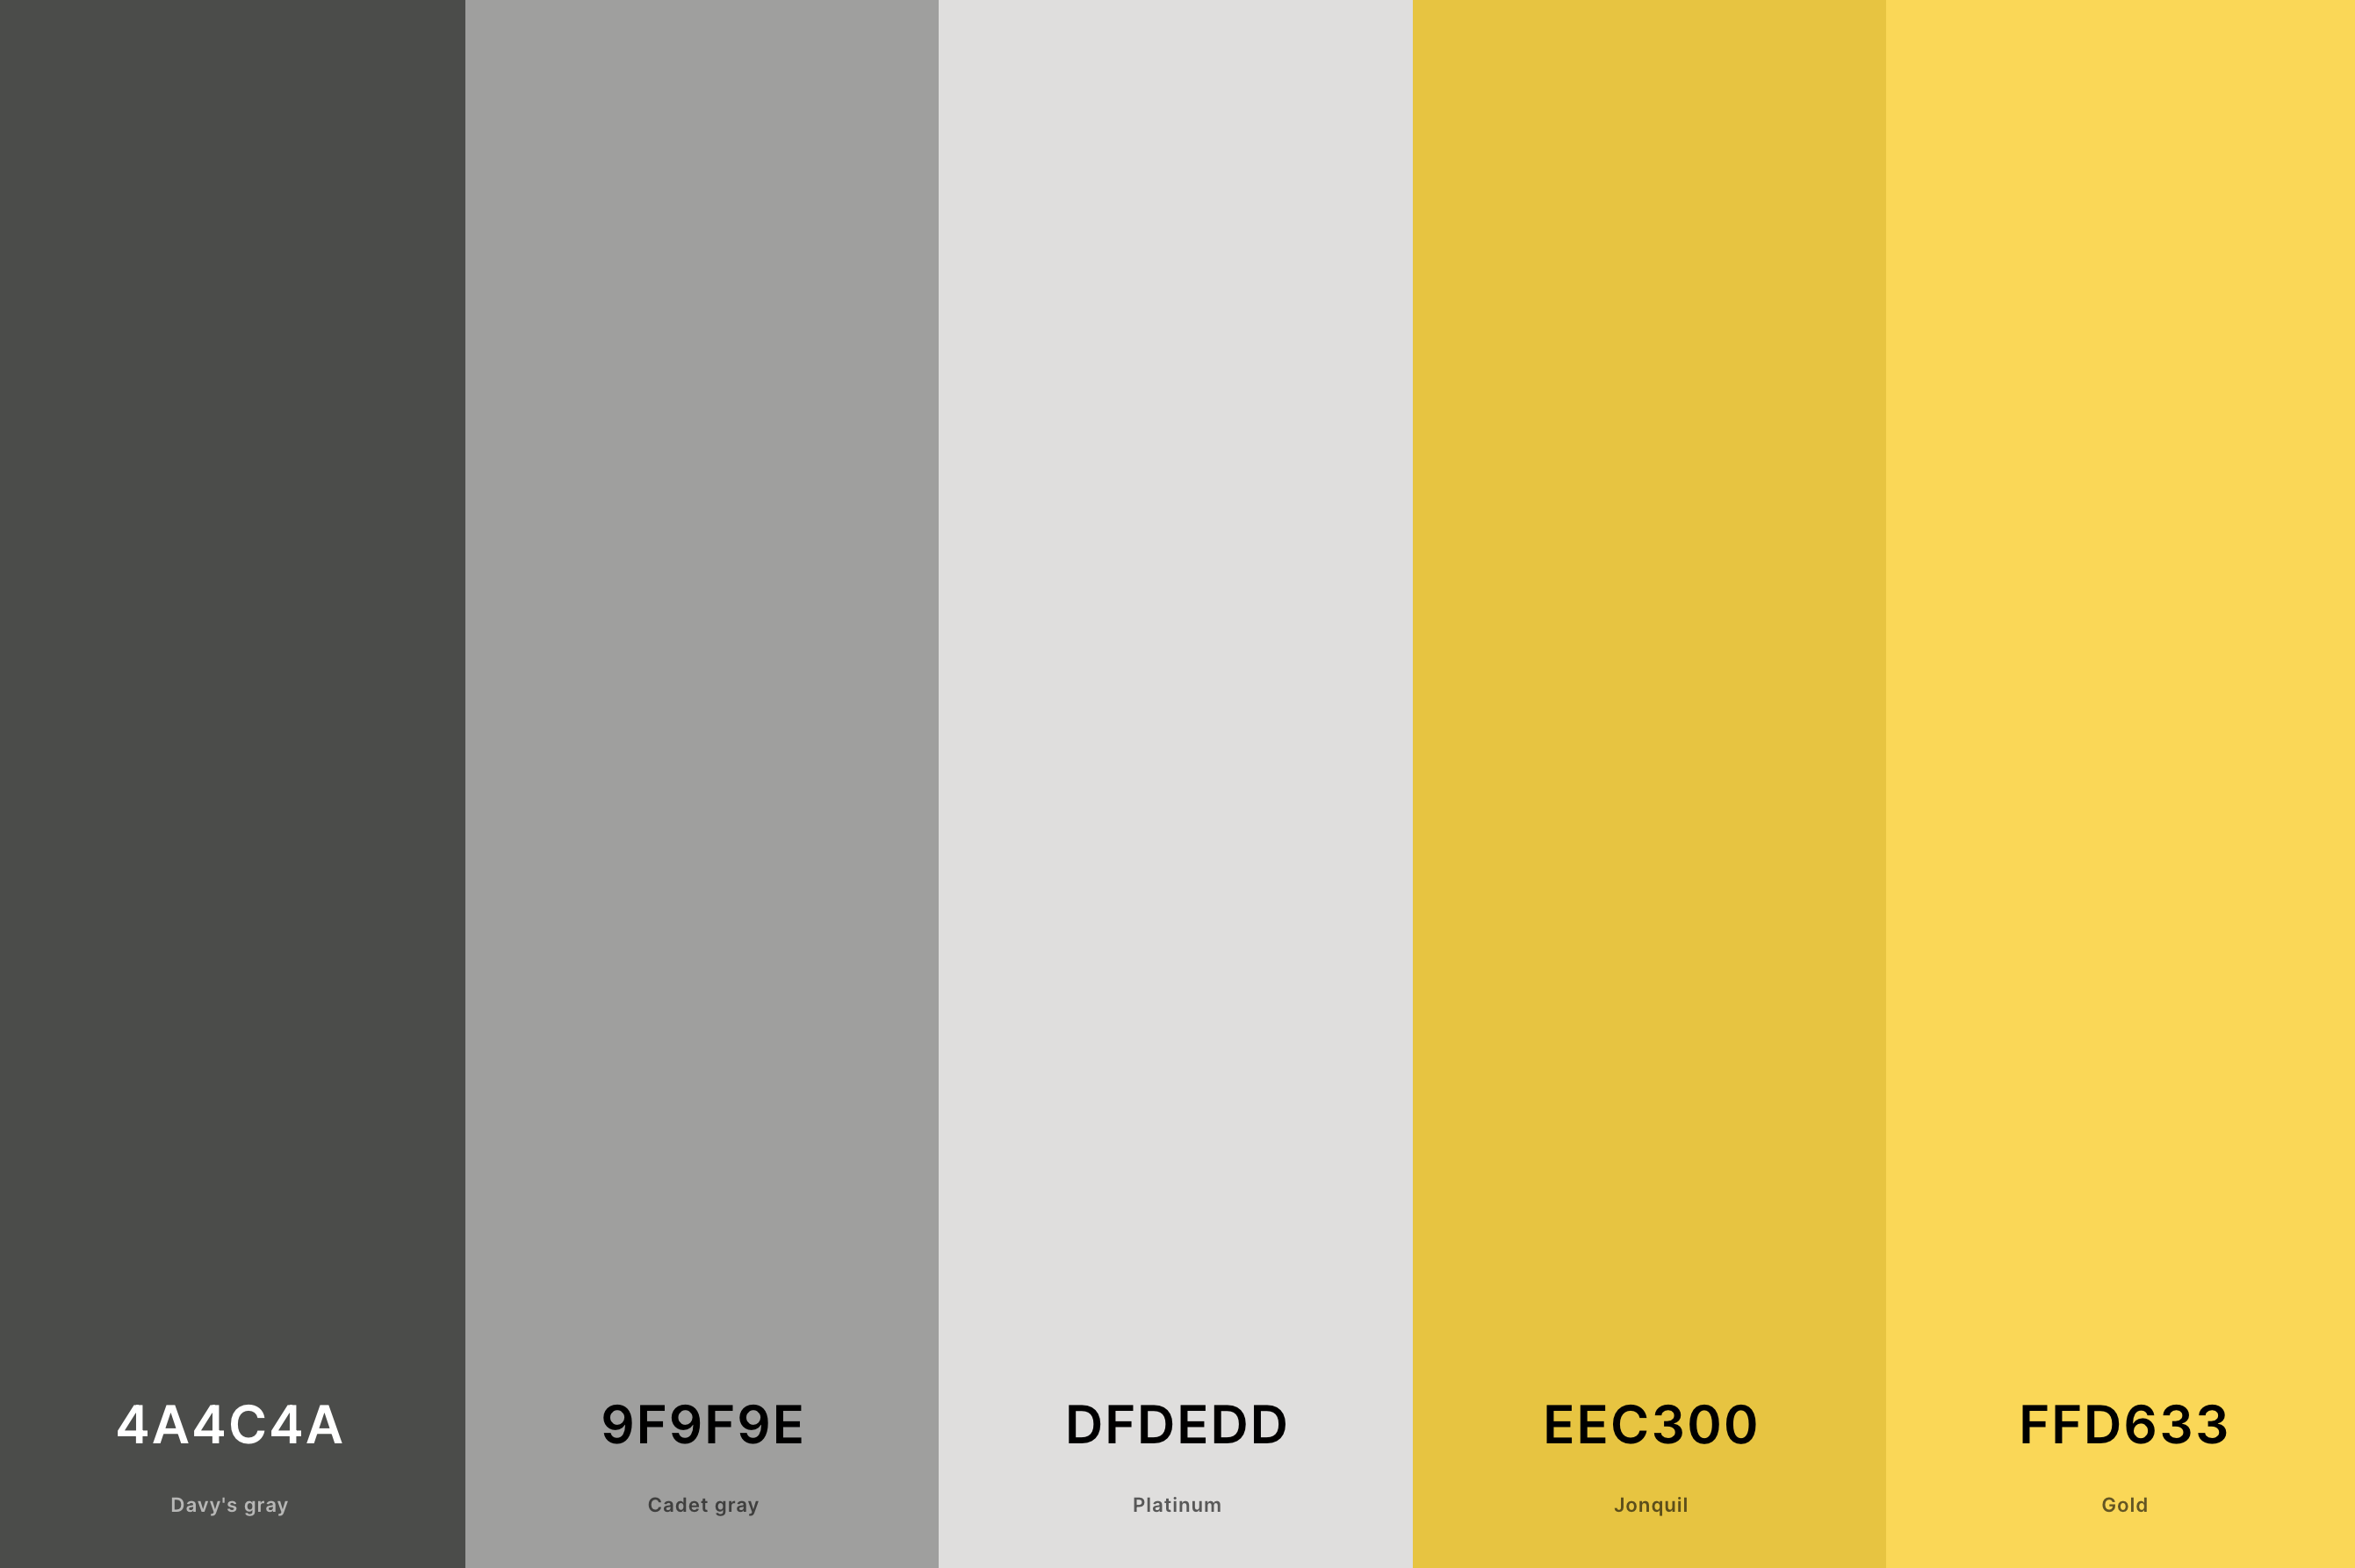 20. Yellow And Grey Color Palette Color Palette with Davy'S Gray (Hex #4A4C4A) + Cadet Gray (Hex #9F9F9E) + Platinum (Hex #DFDEDD) + Jonquil (Hex #EEC300) + Gold (Hex #FFD633) Color Palette with Hex Codes